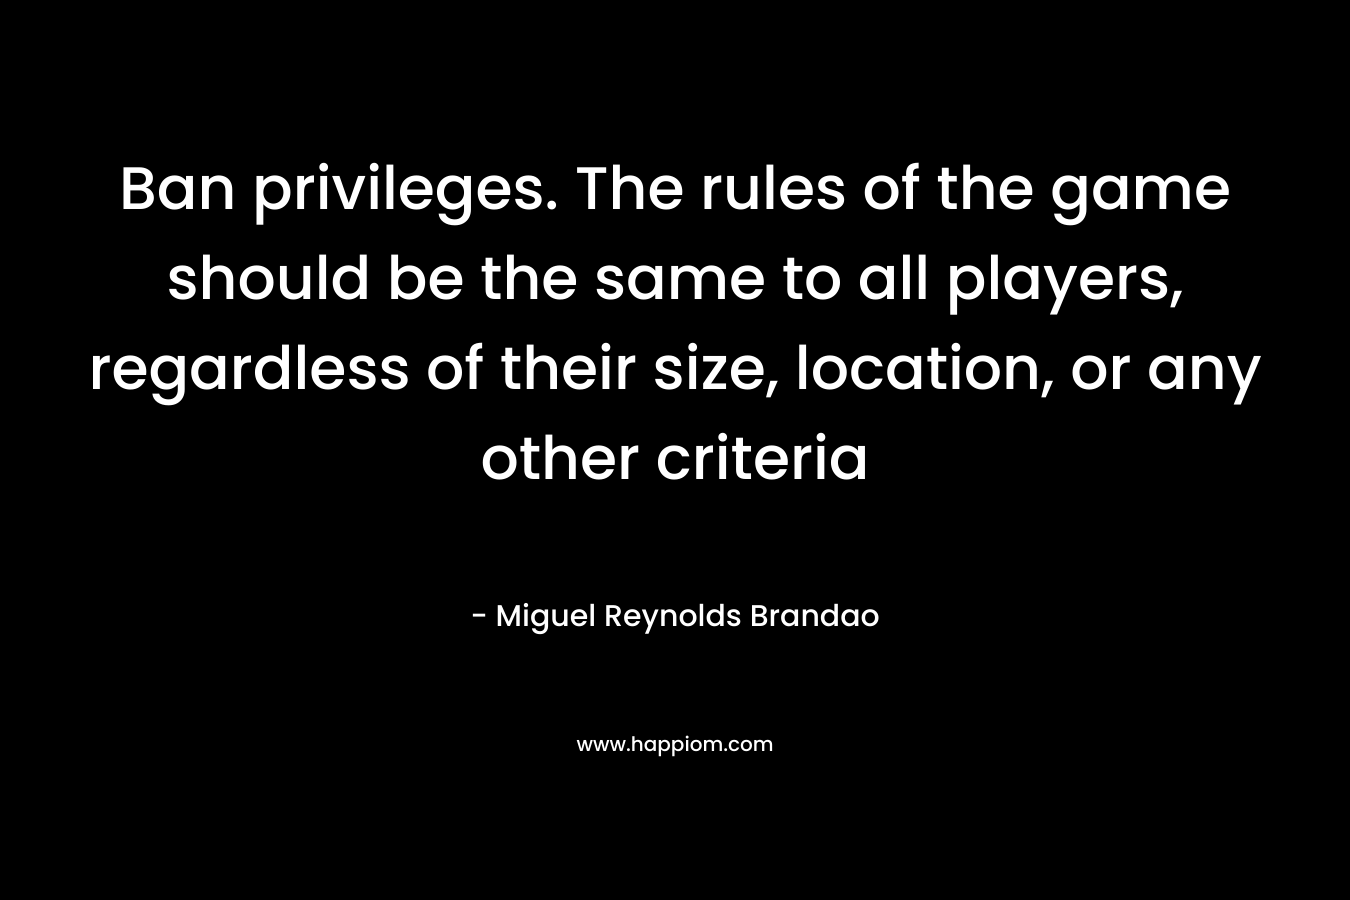 Ban privileges. The rules of the game should be the same to all players, regardless of their size, location, or any other criteria – Miguel Reynolds Brandao